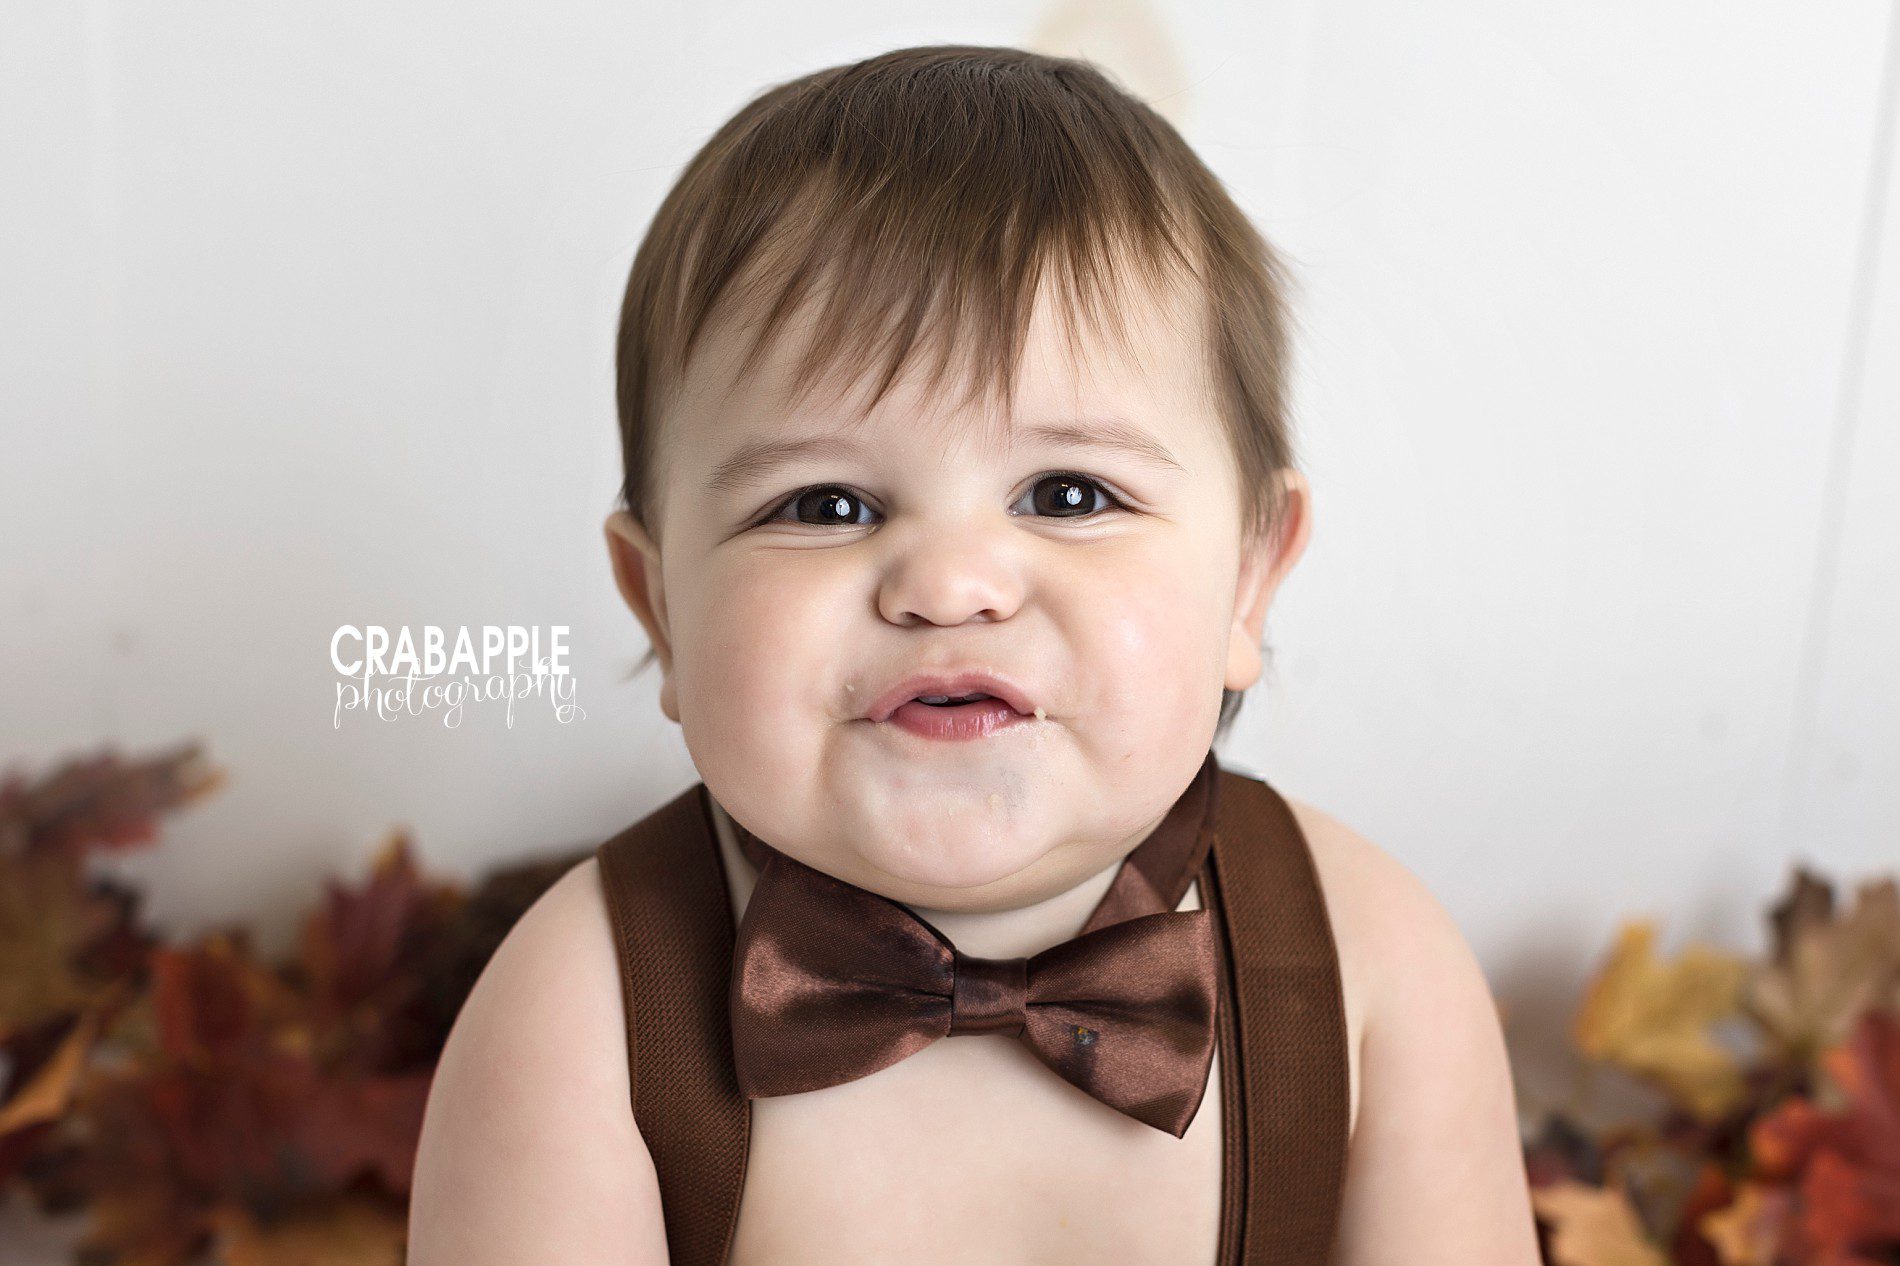 Baby Portrait of a 1 year old boy wearing a brown bowtie and suspenders.